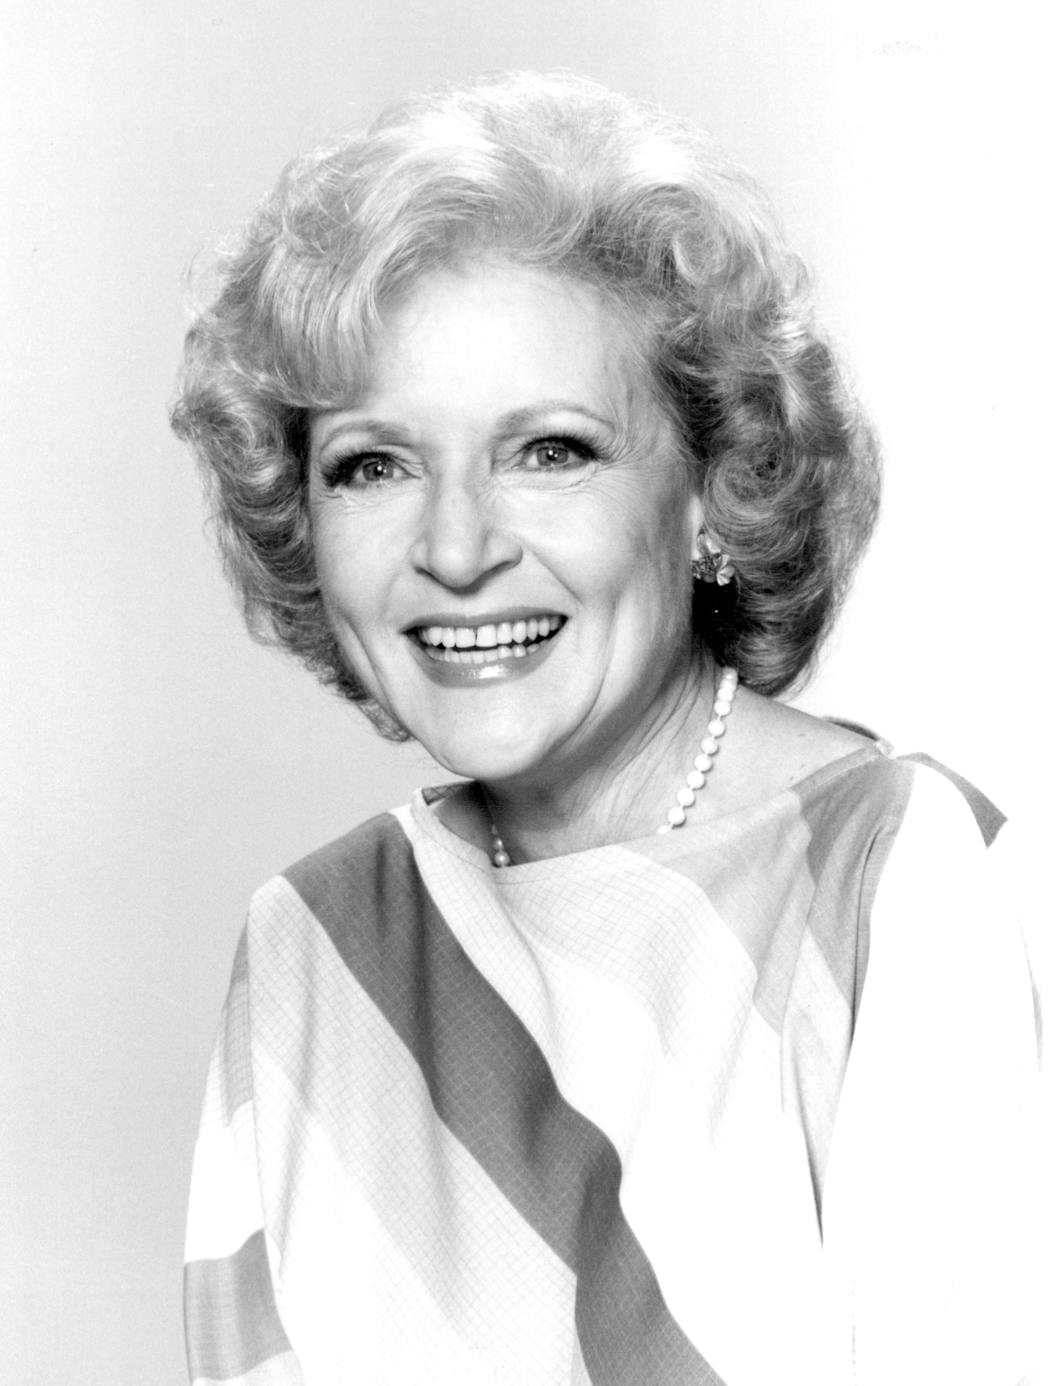 Betty White in a 1985 publicity image from 